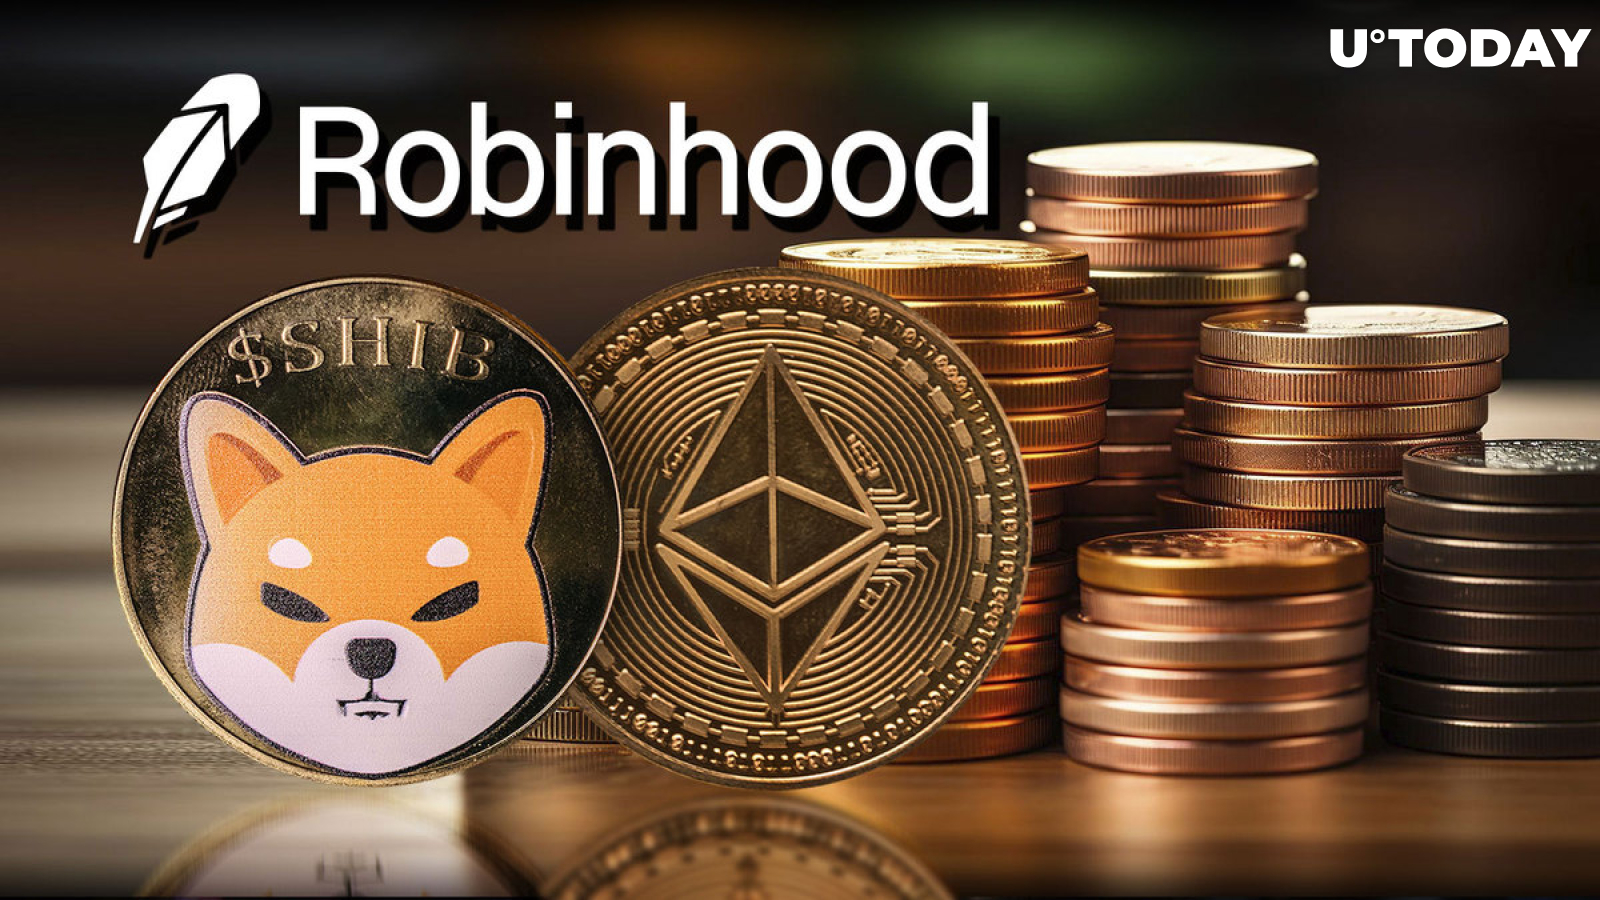 Mysterious 7,000 ETH Move to Robinhood as Ethereum Tops $3,000